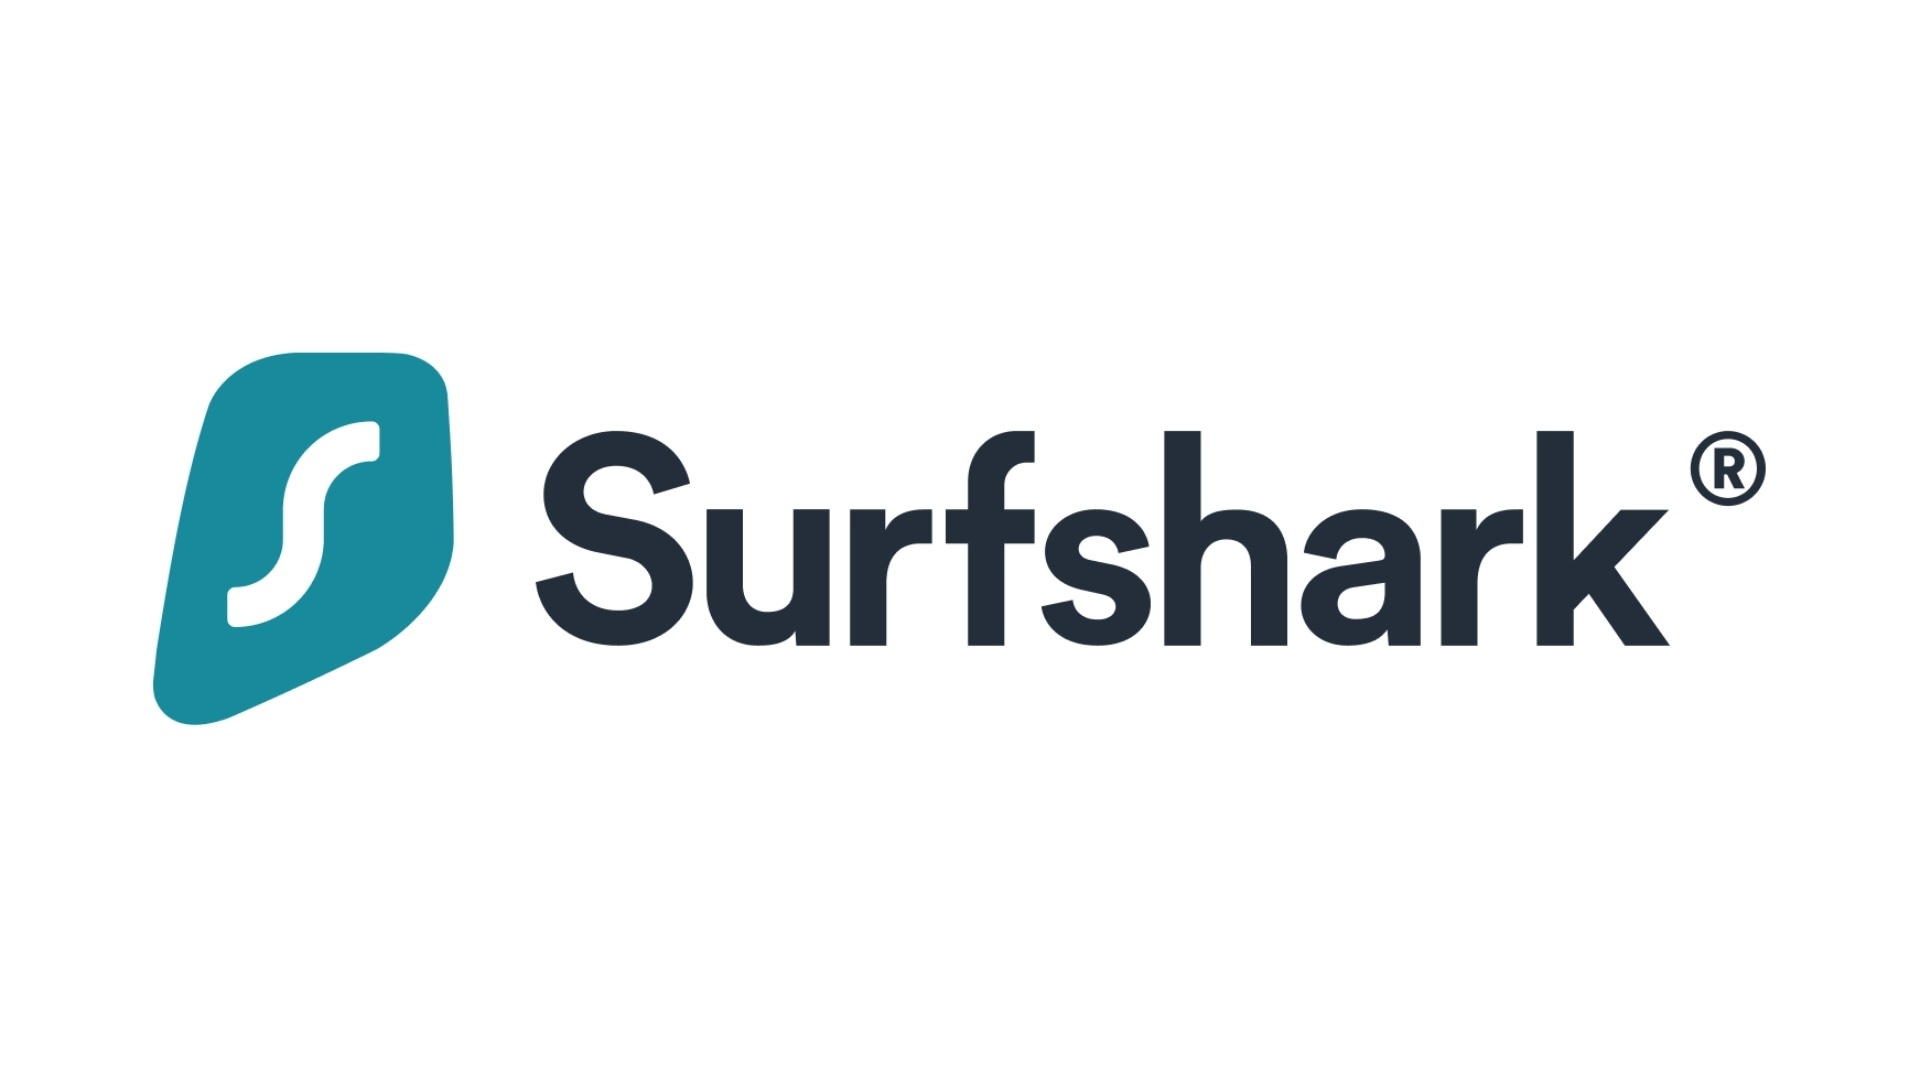 VPN free trial: Surfshark. Image shows the company logo.